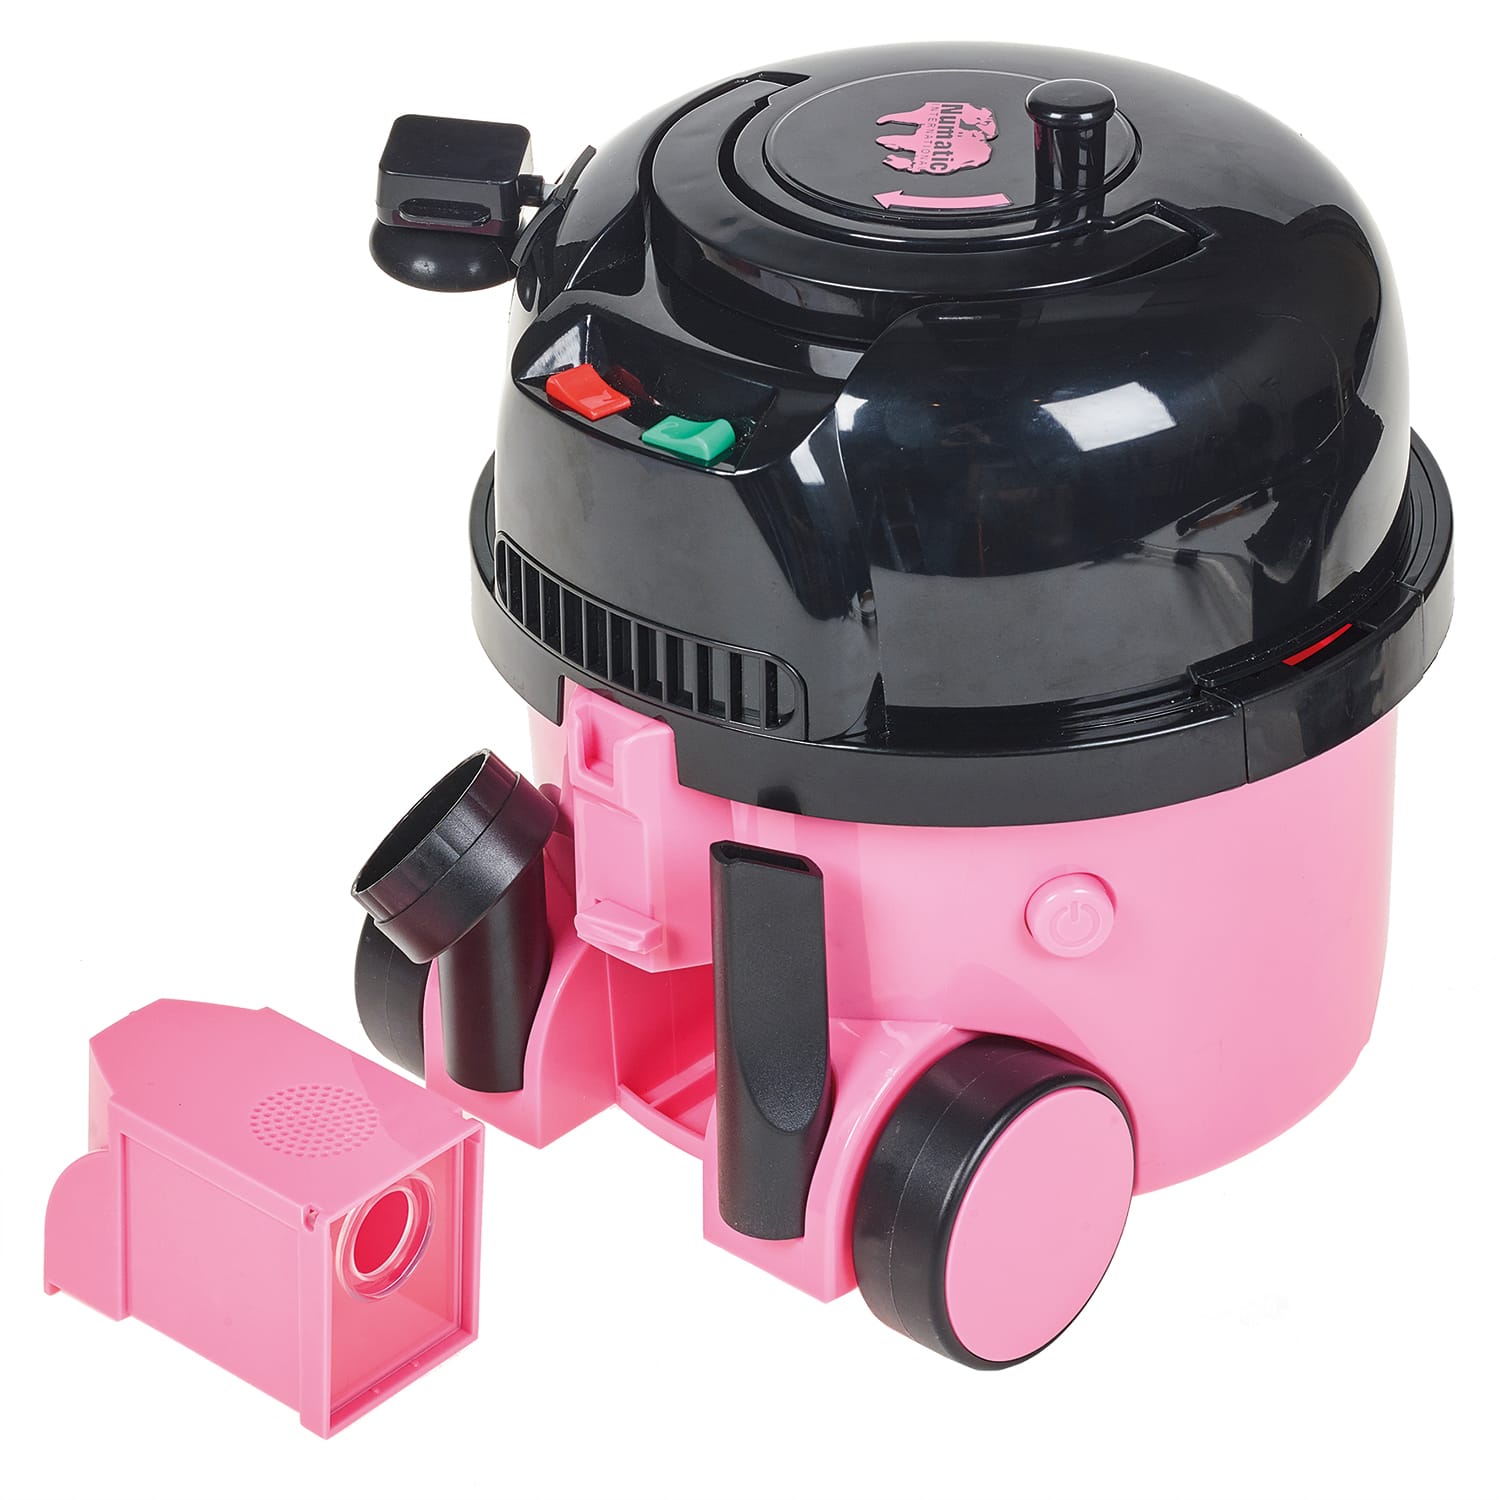 hetty the hoover toy